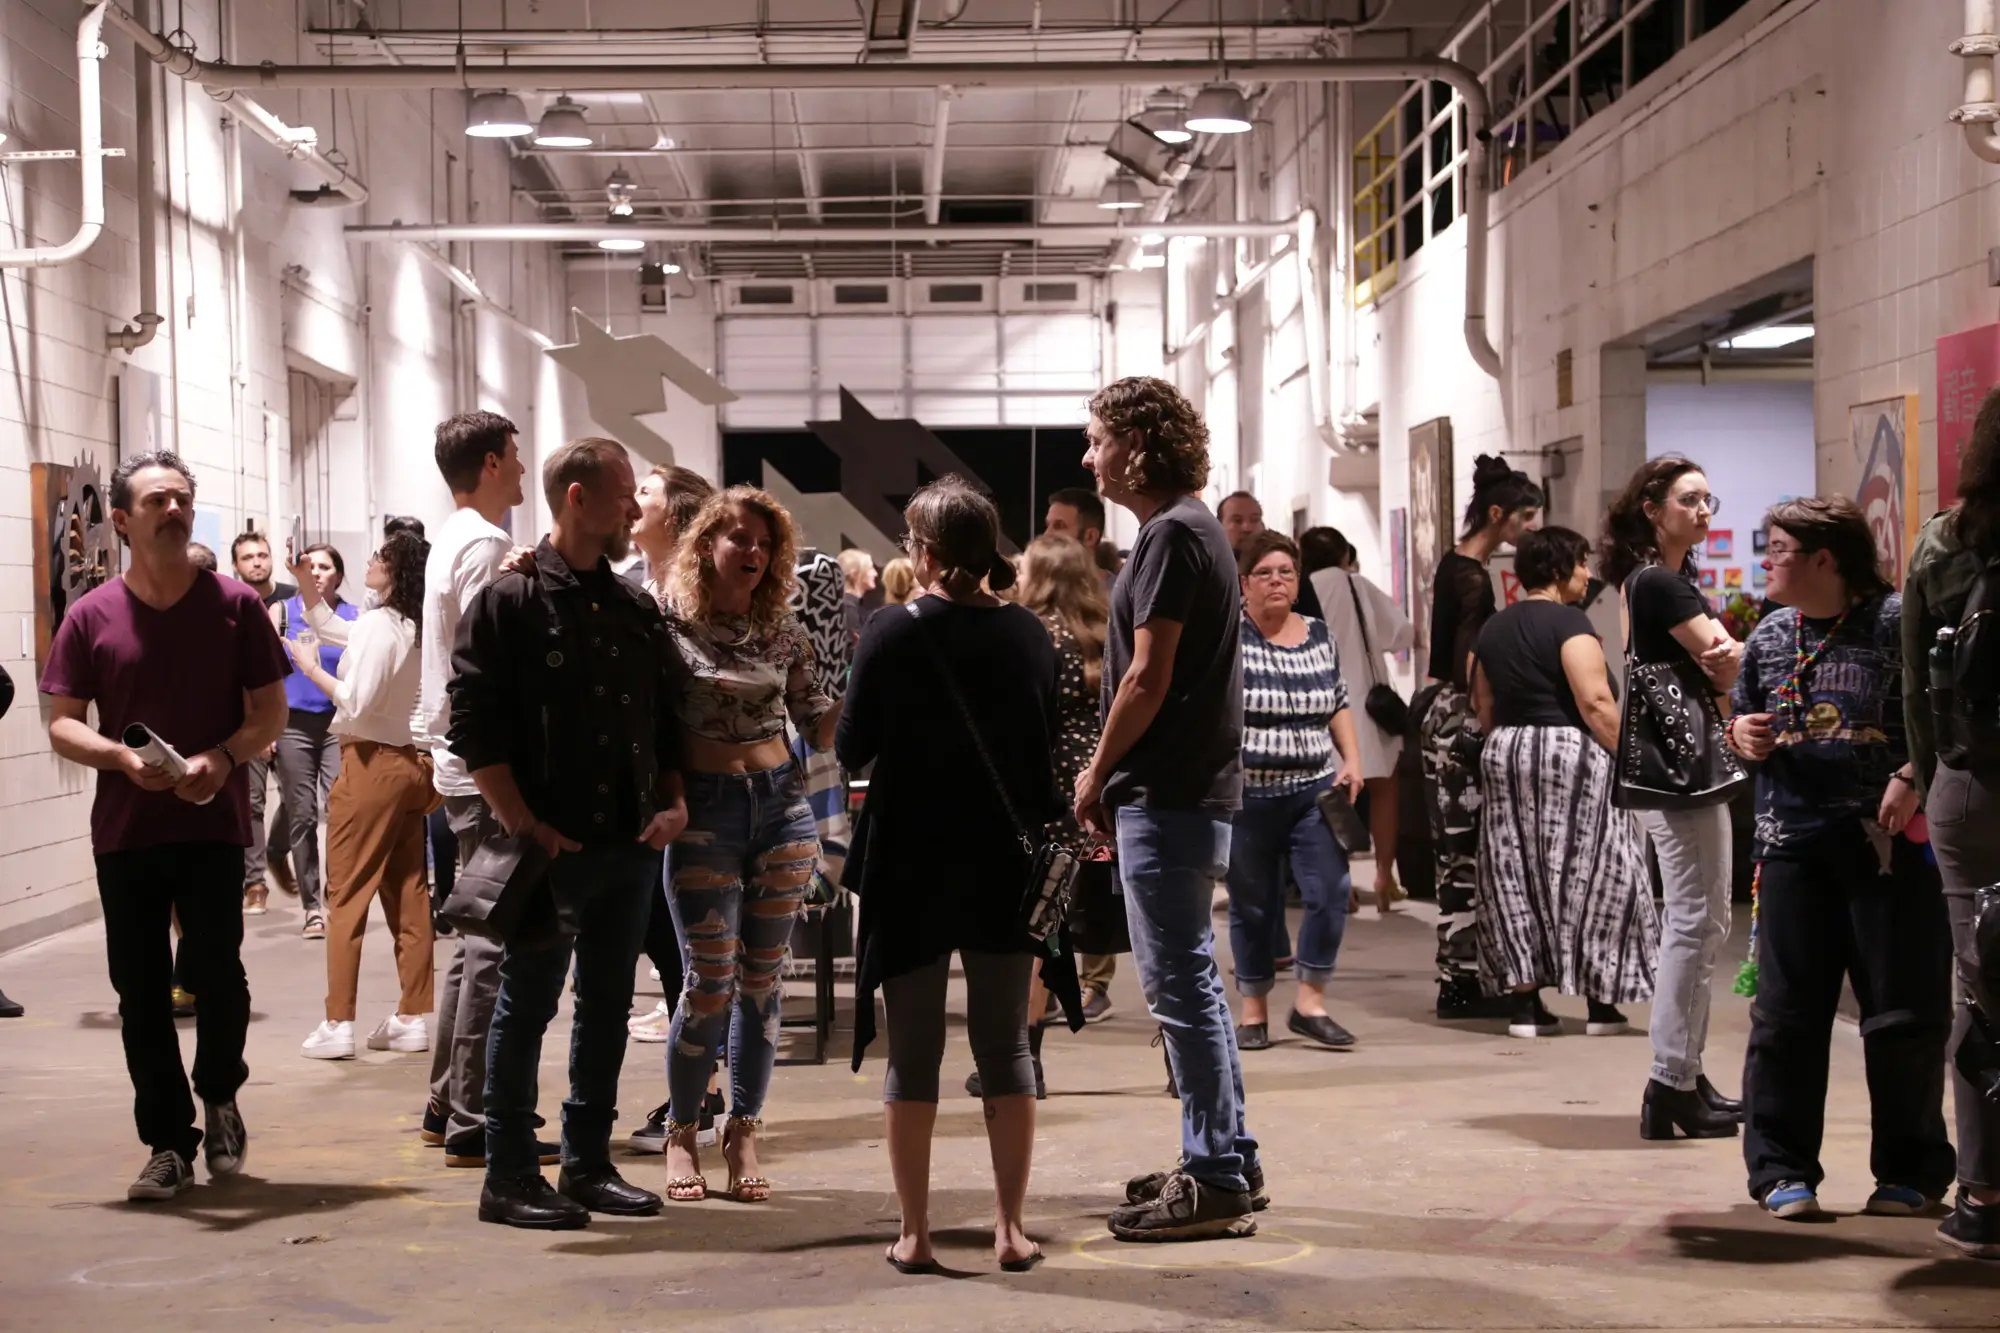 A crowd of people standing in a warehouse.